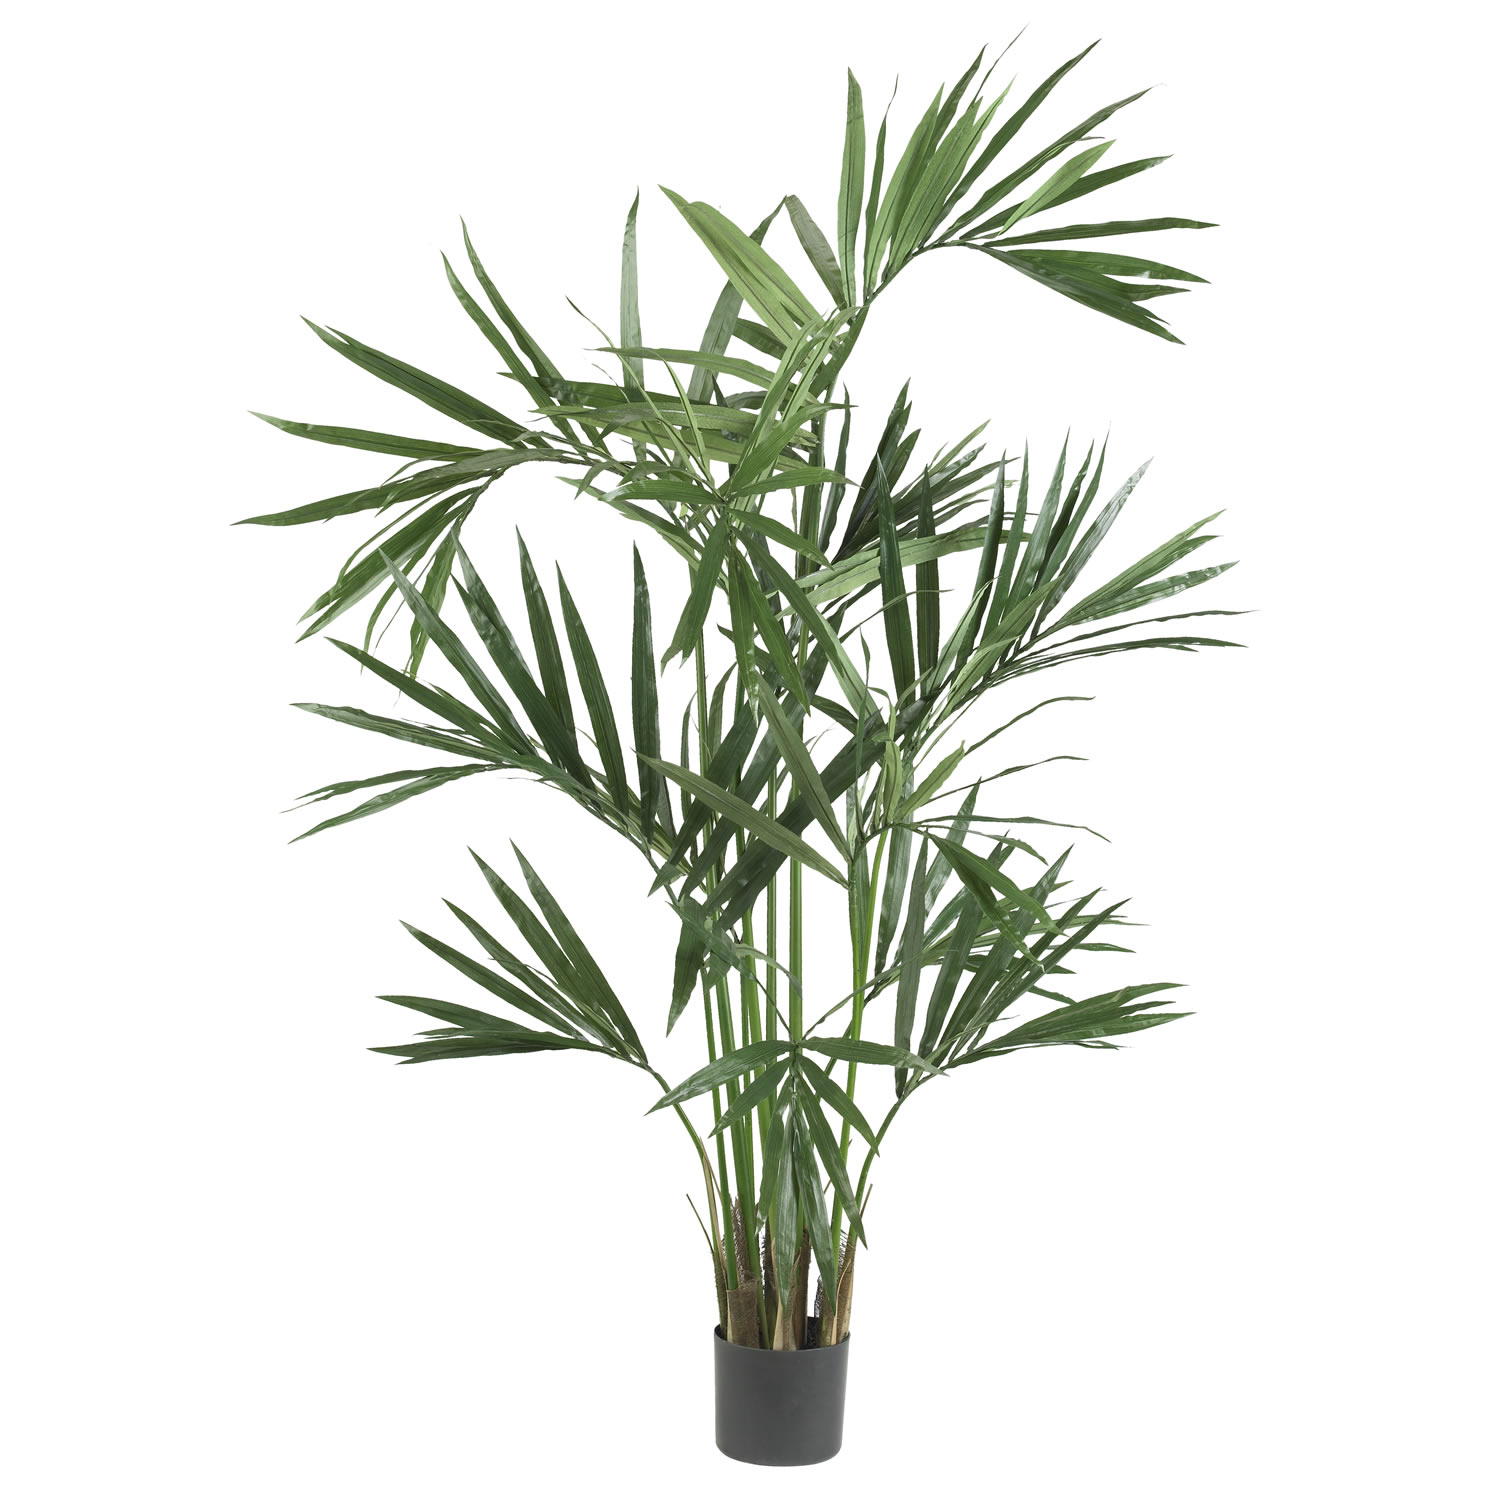 6 Foot Kentia Palm Tree: Potted